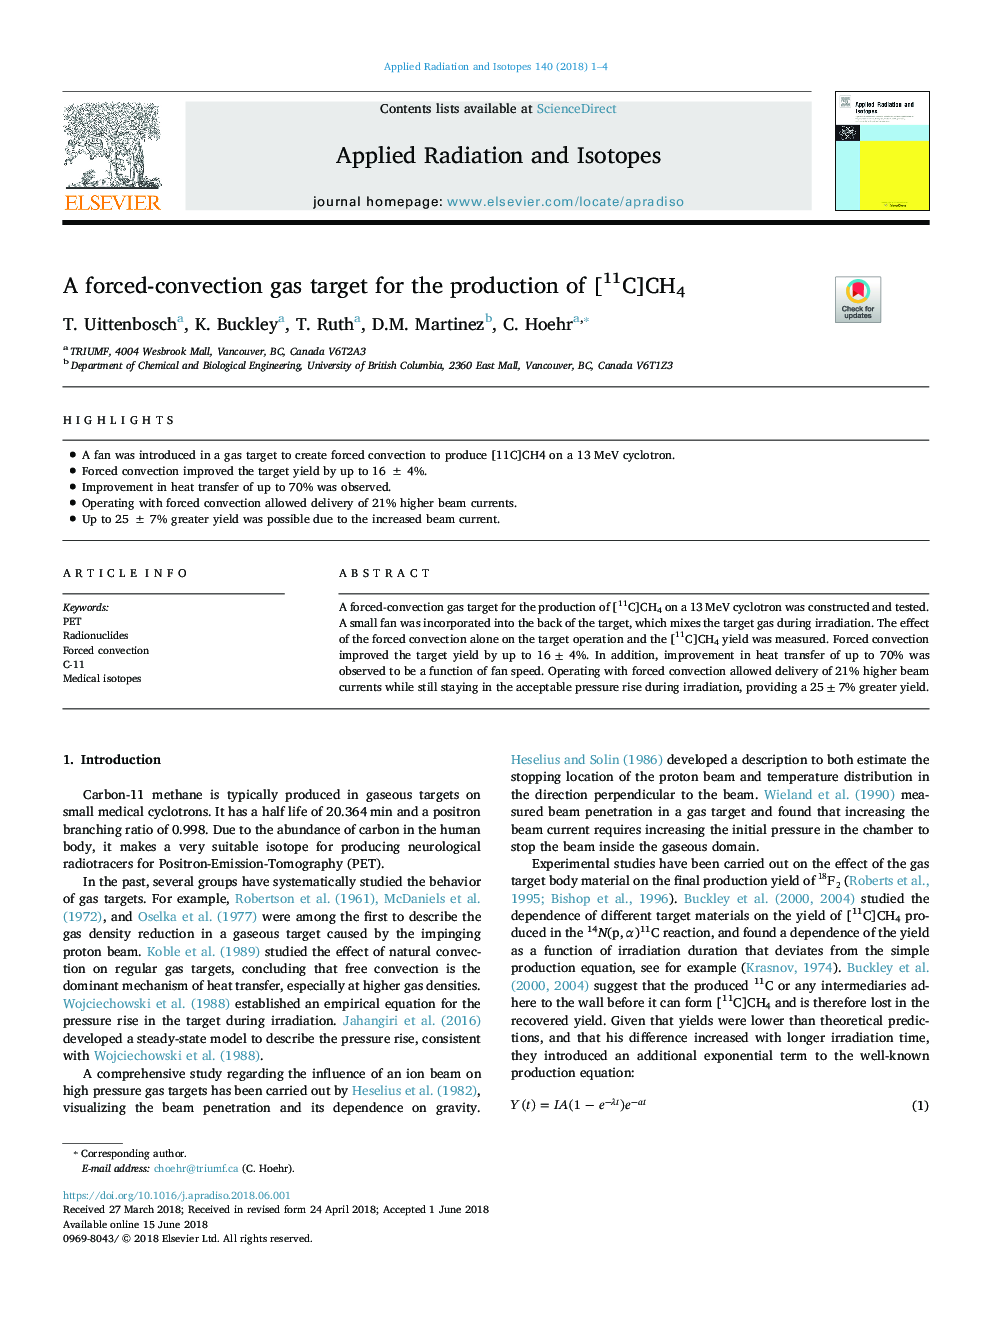 A forced-convection gas target for the production of [11C]CH4